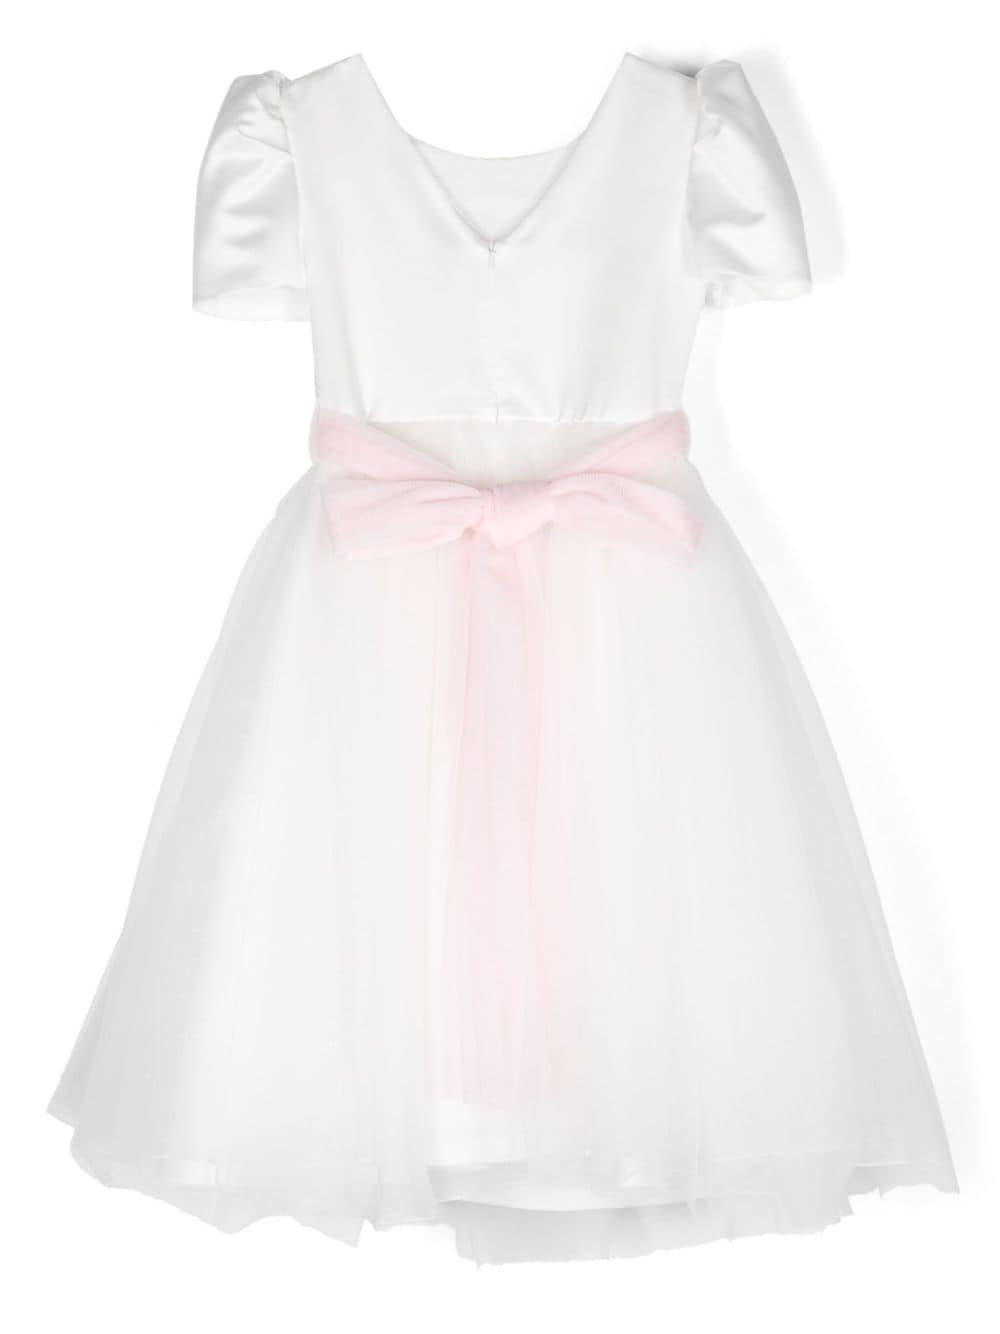 Robe fille blanche